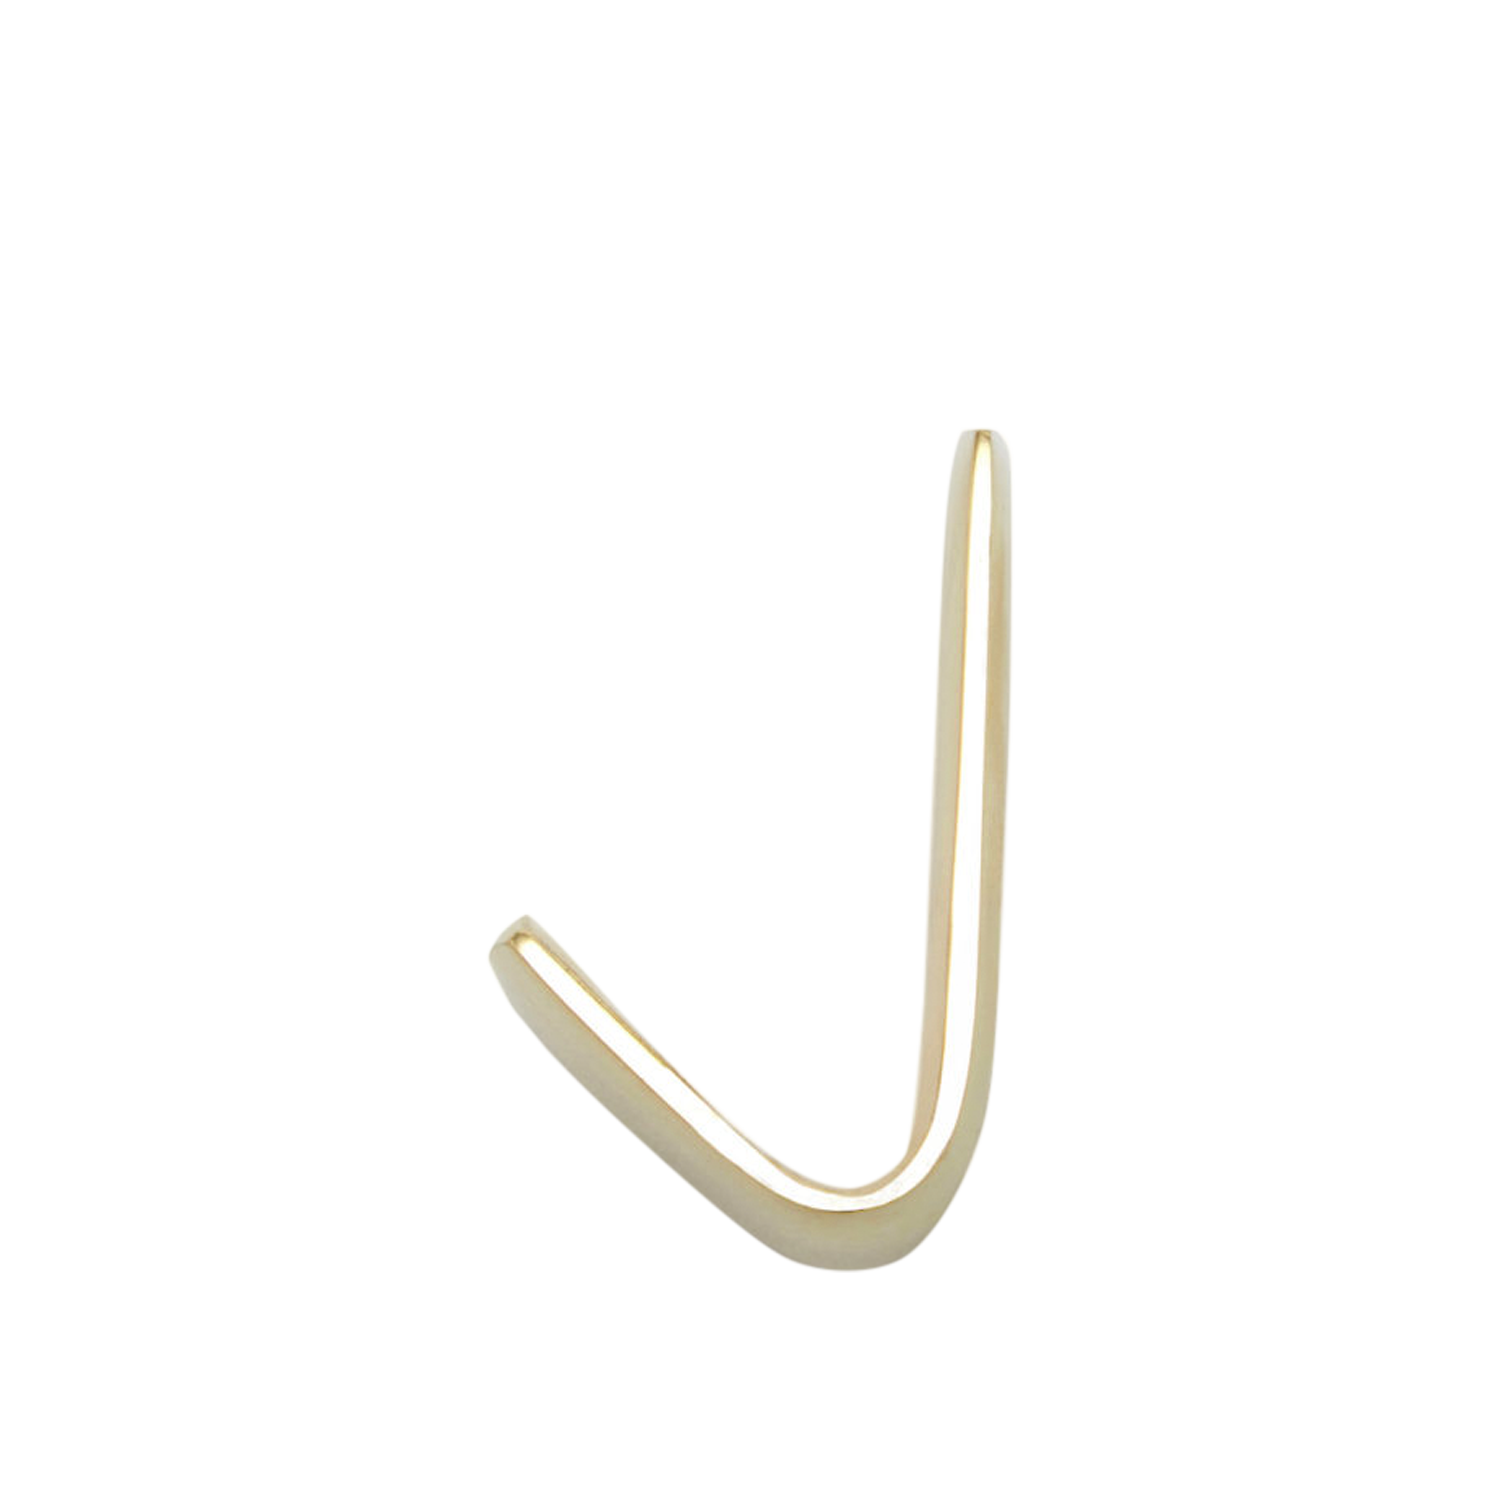 #5262-1 Small Square Hook